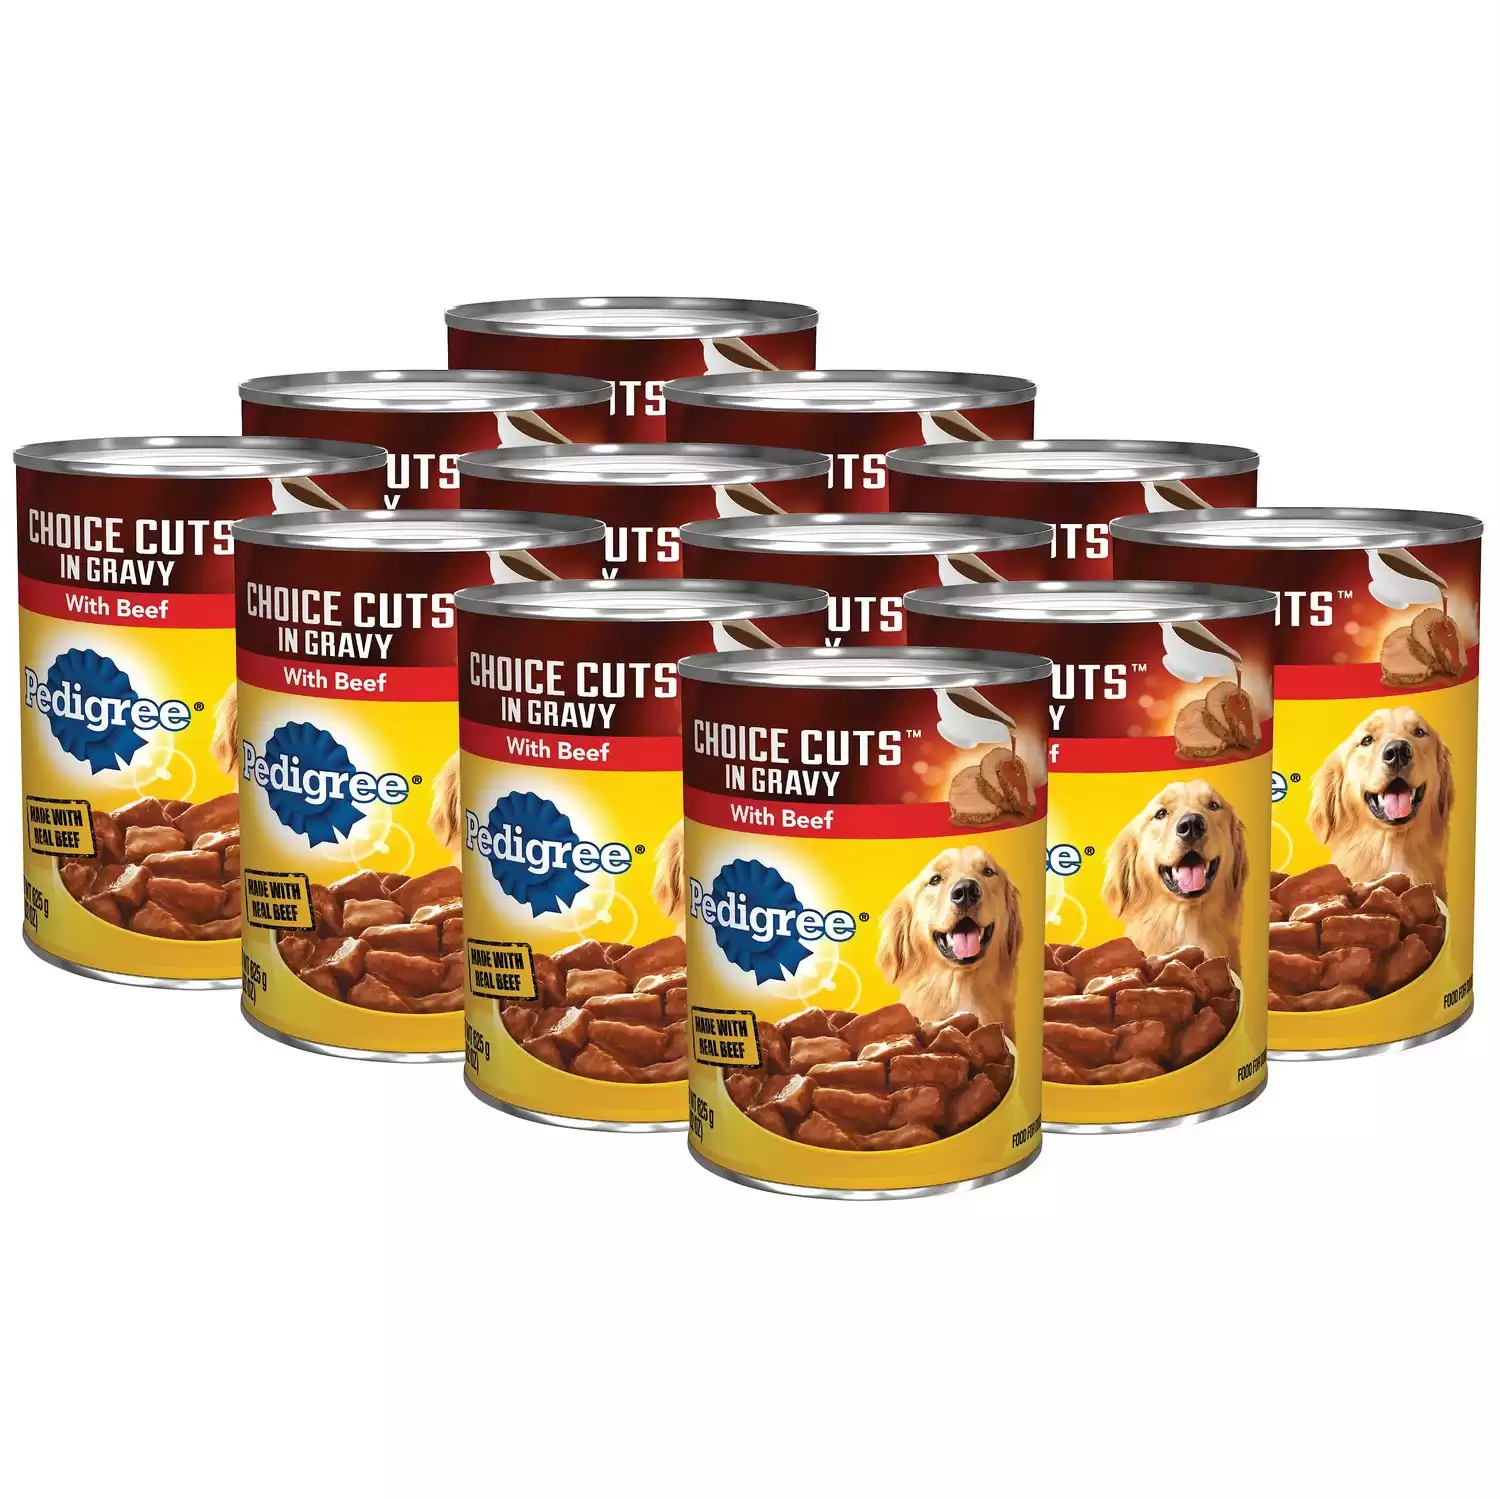 Pedigree Choice Cuts in Gravy With Beef Canned Dog Food